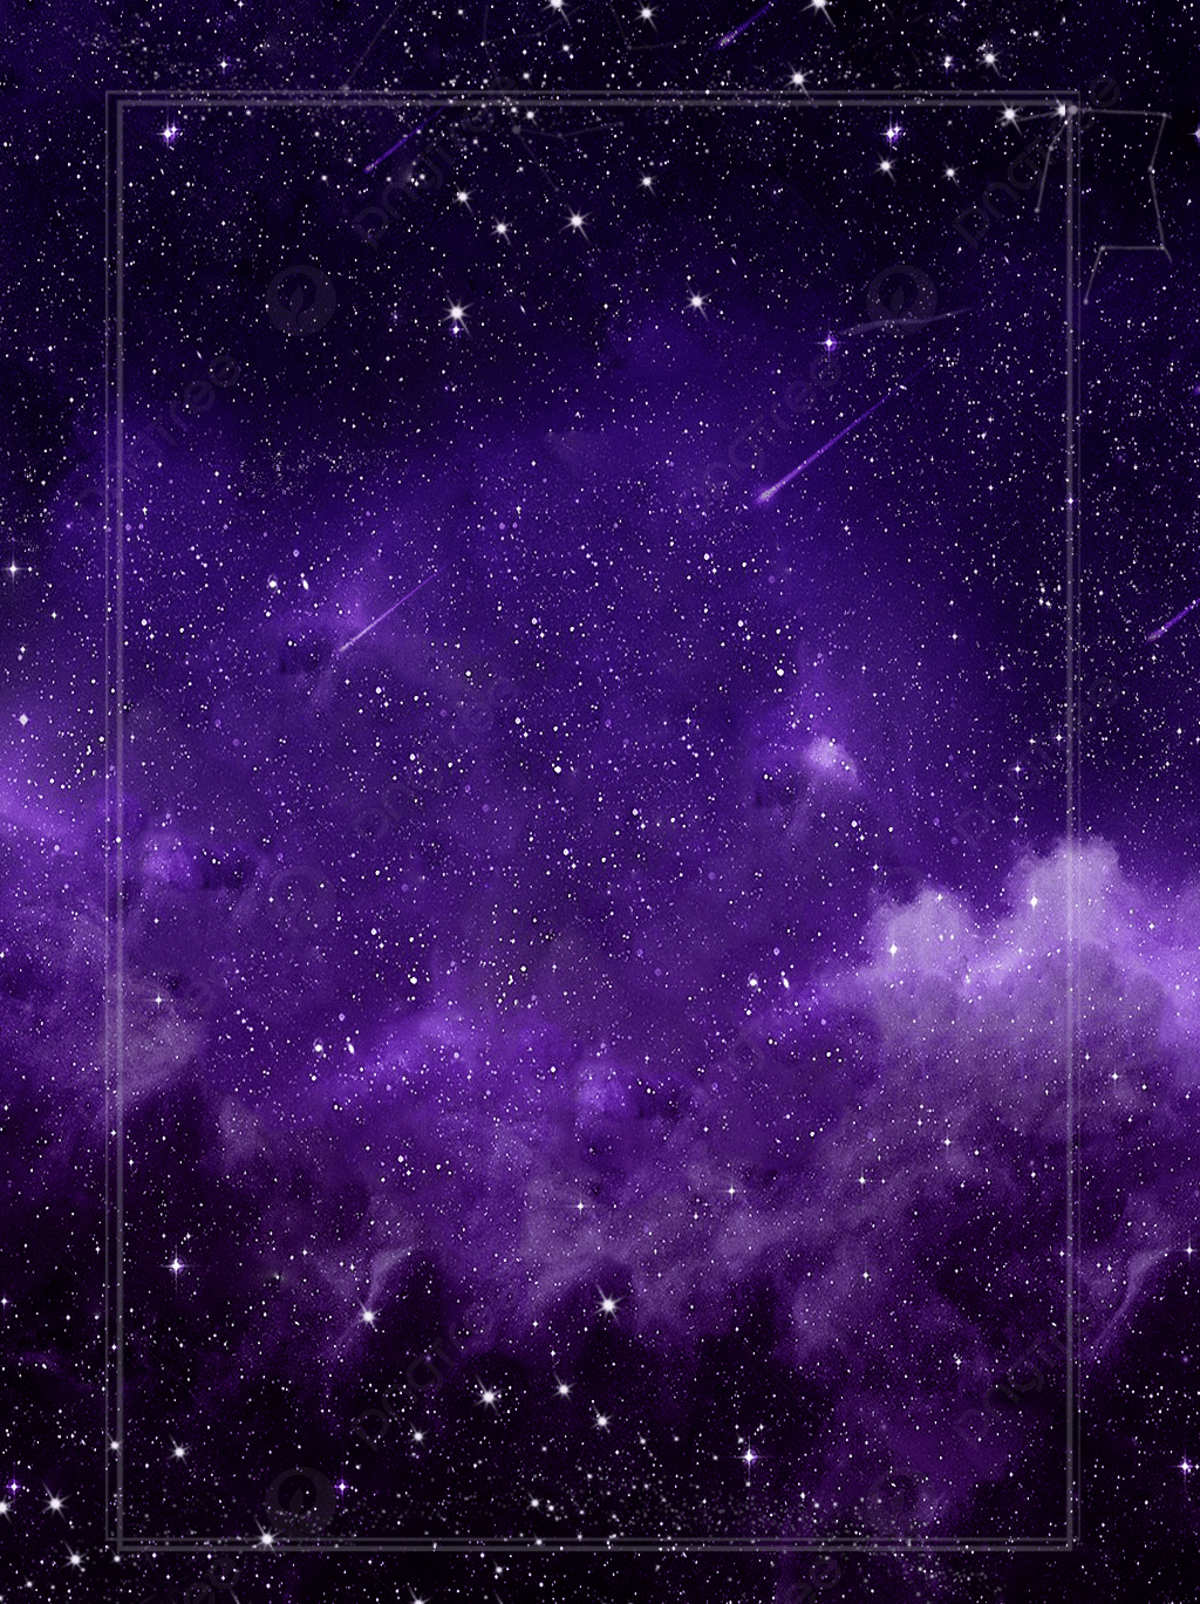 Original Beautiful Purple Star Dreamy Star River Background Wallpaper Image For Free Download